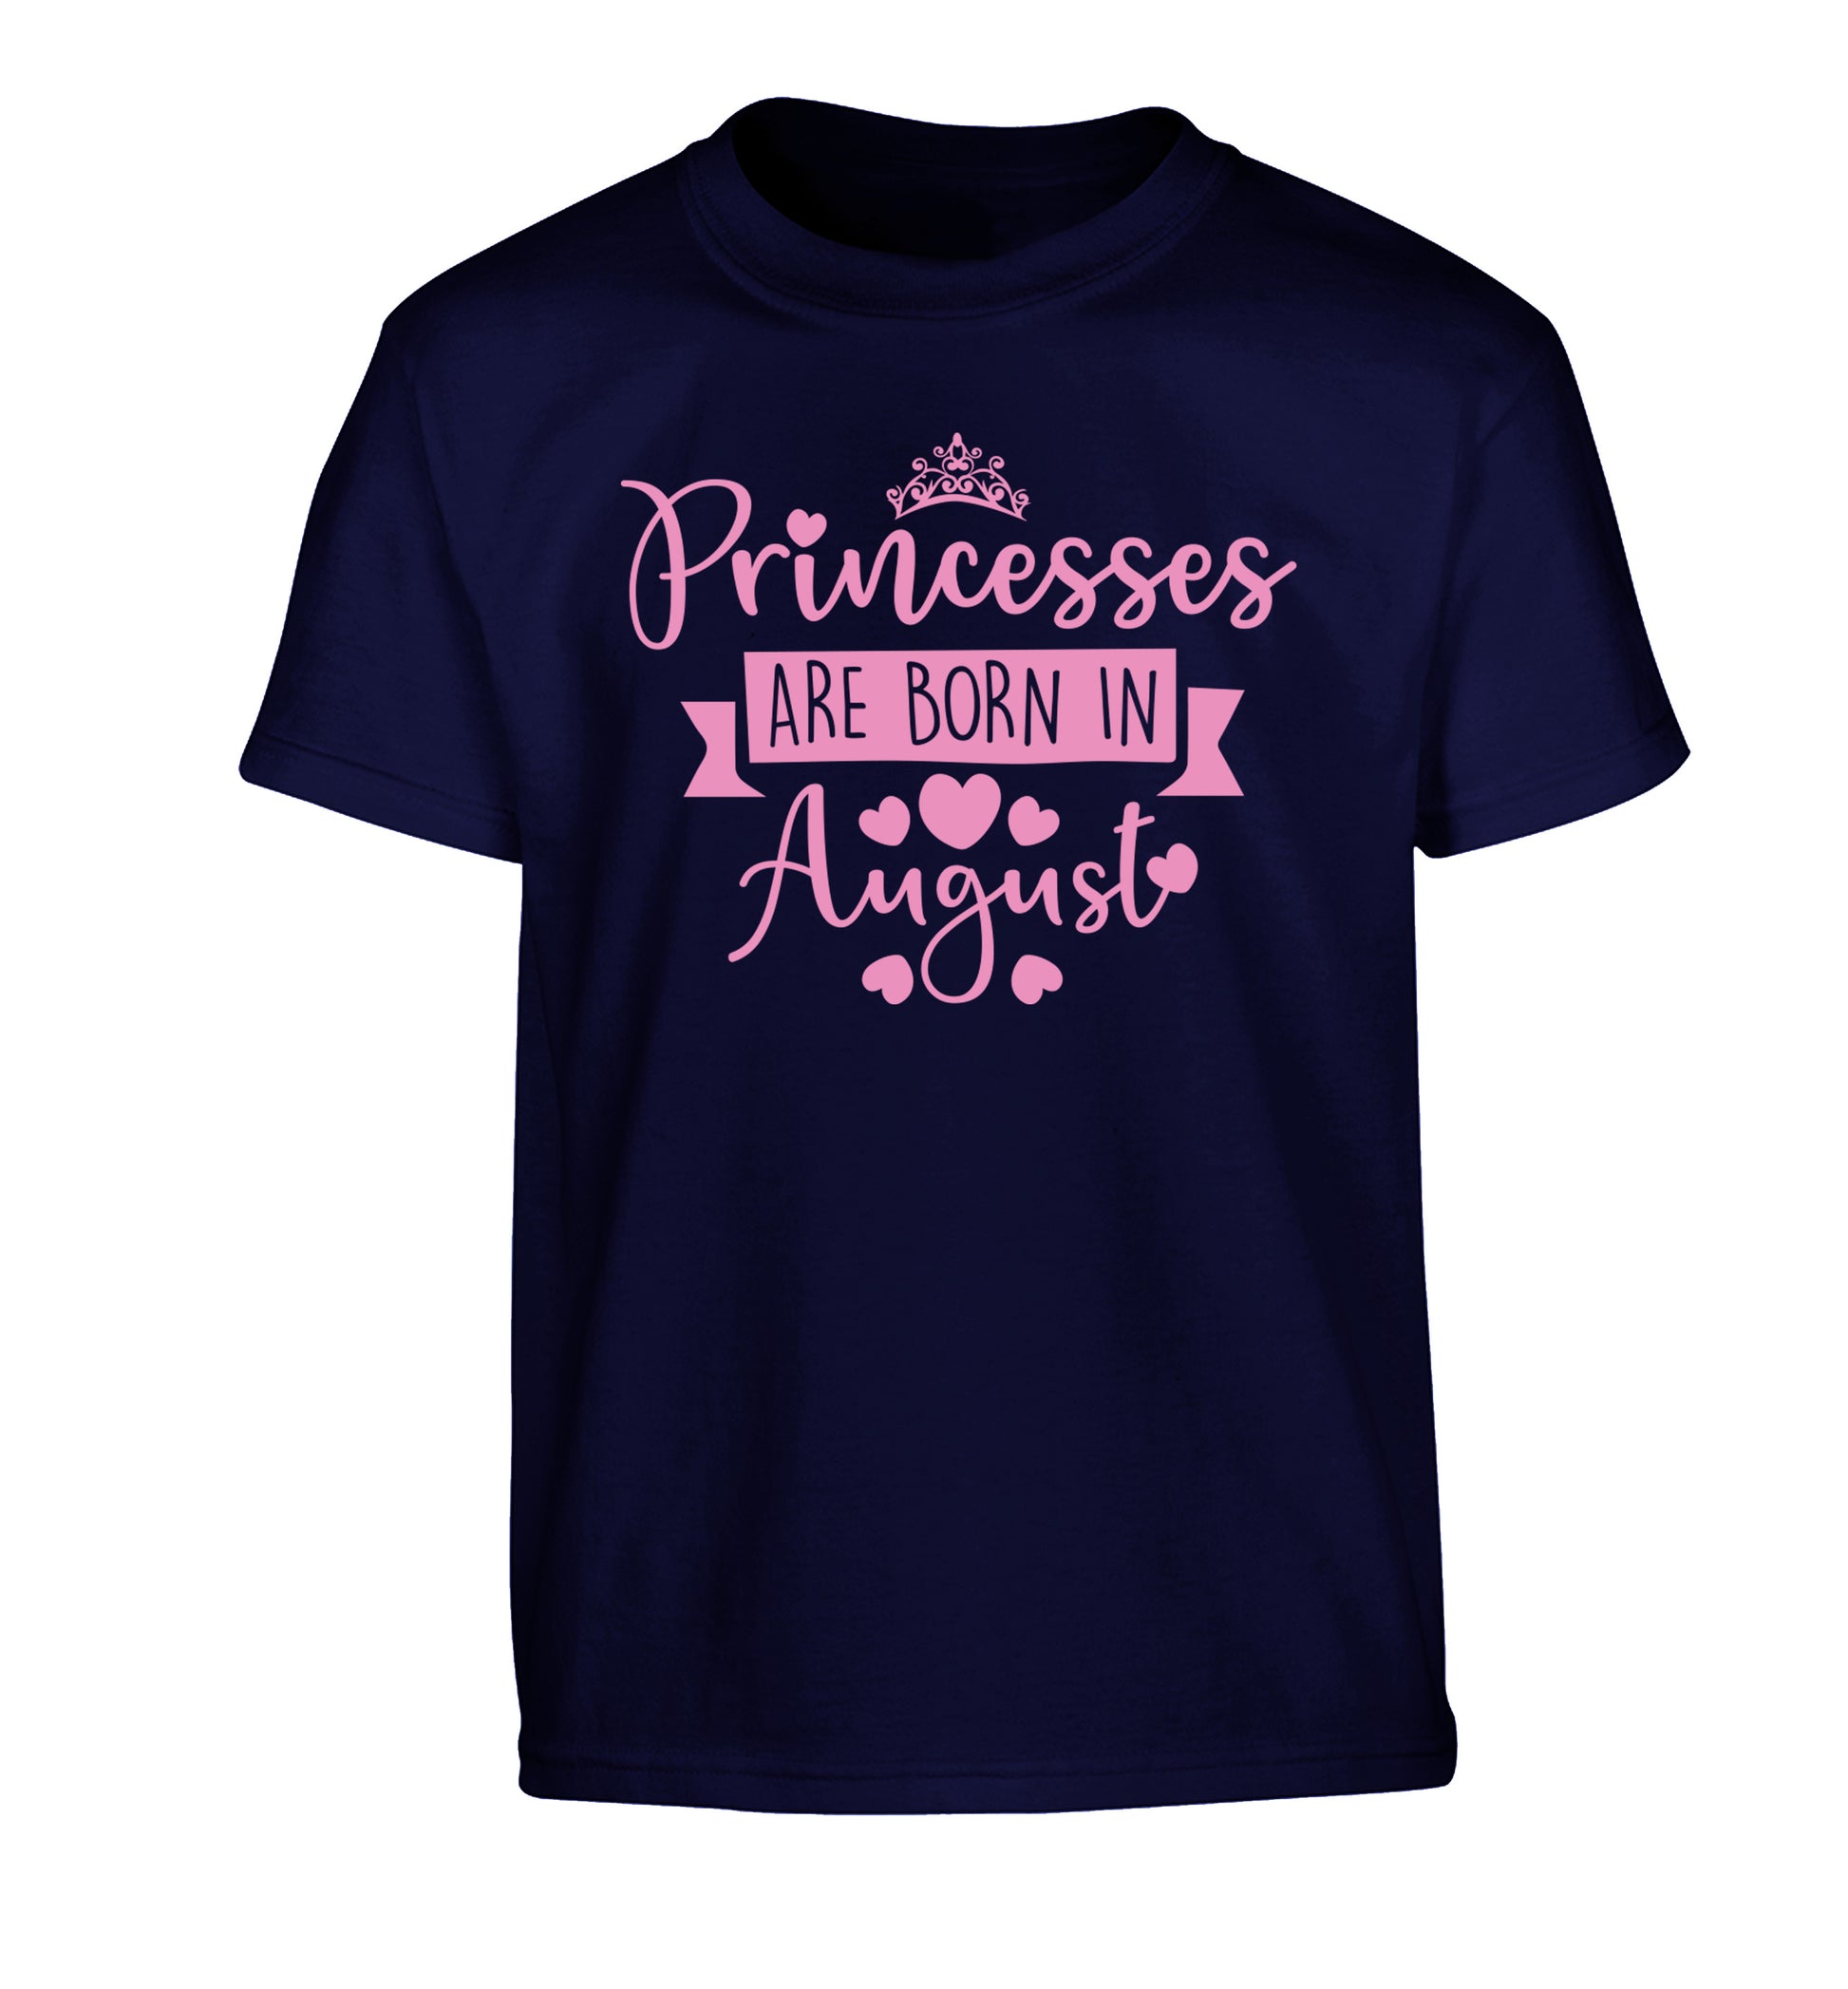 Princesses are born in August Children's navy Tshirt 12-13 Years